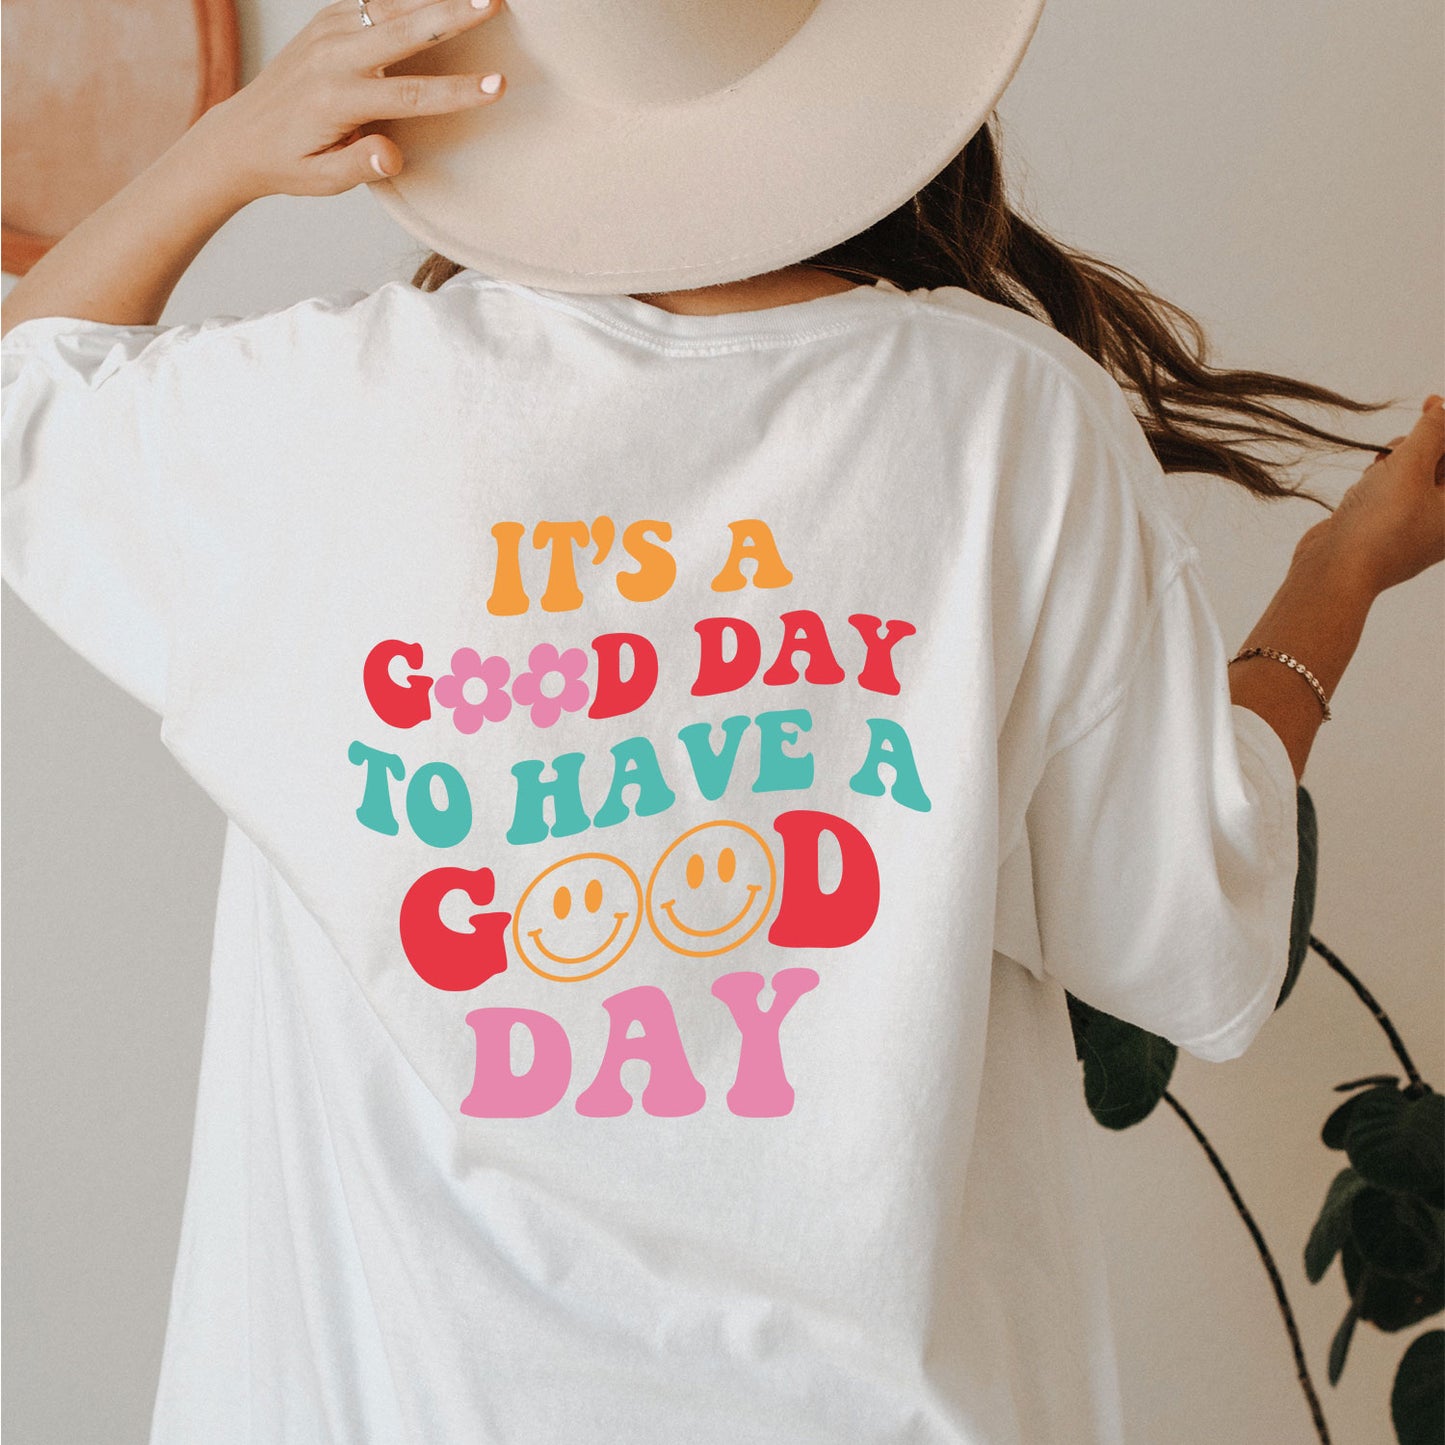 Today Is A Good Day - Front & Back Set - Screen Print Transfer